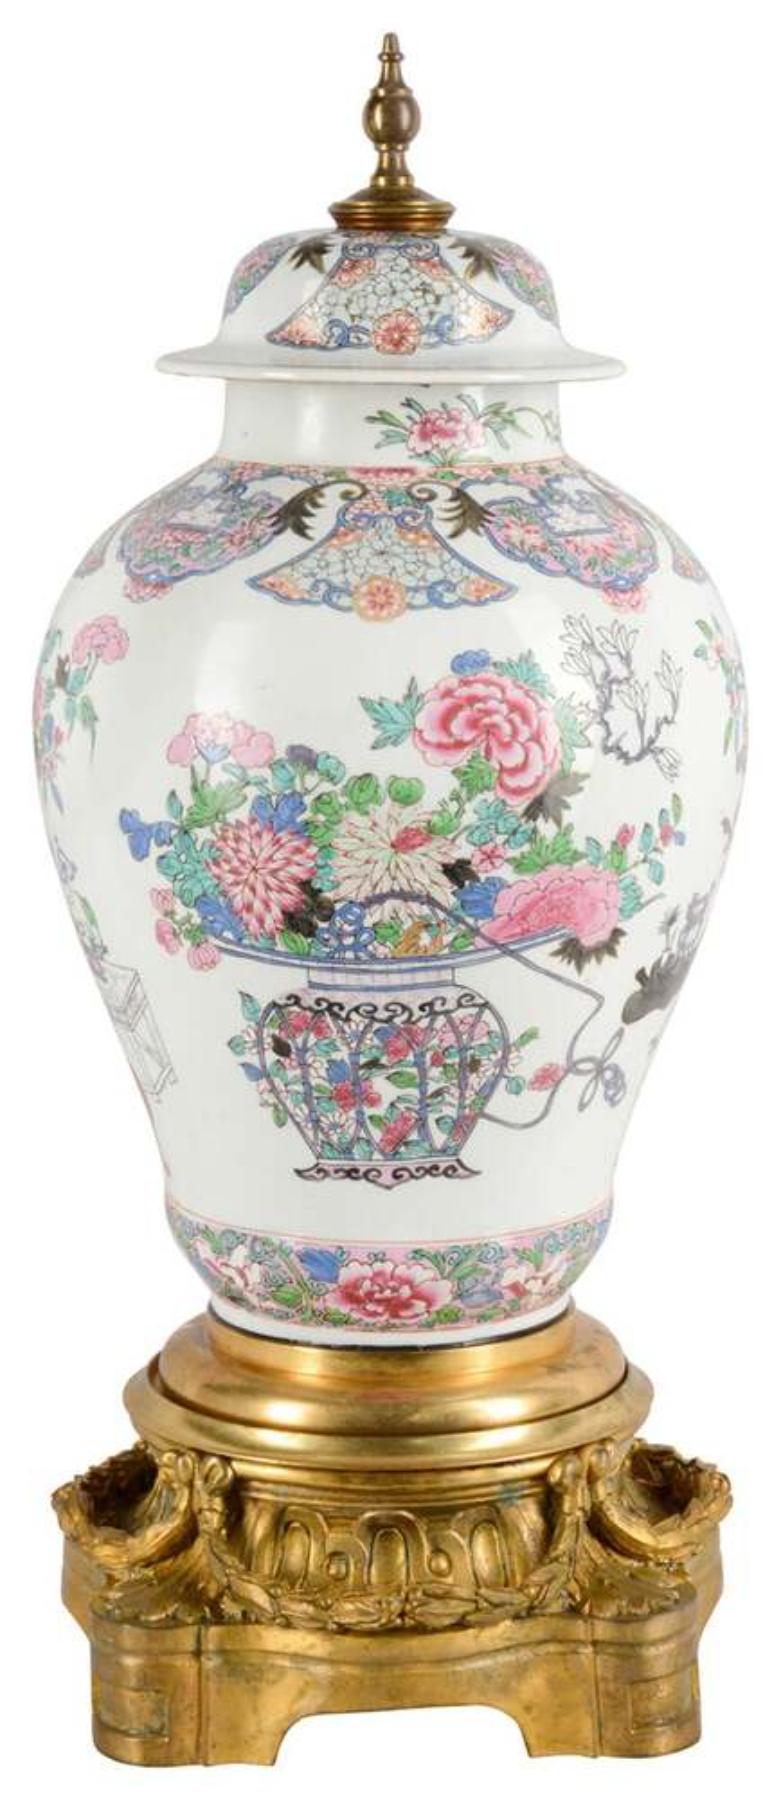 A very good quality late 19th century Samson porcelain, Famille Rose style porcelain lidded vase / lamp. Having wonderful colorful classical oriental motif, floral and foliate decoration with exotic birds among them. Mounted on a classical gilded